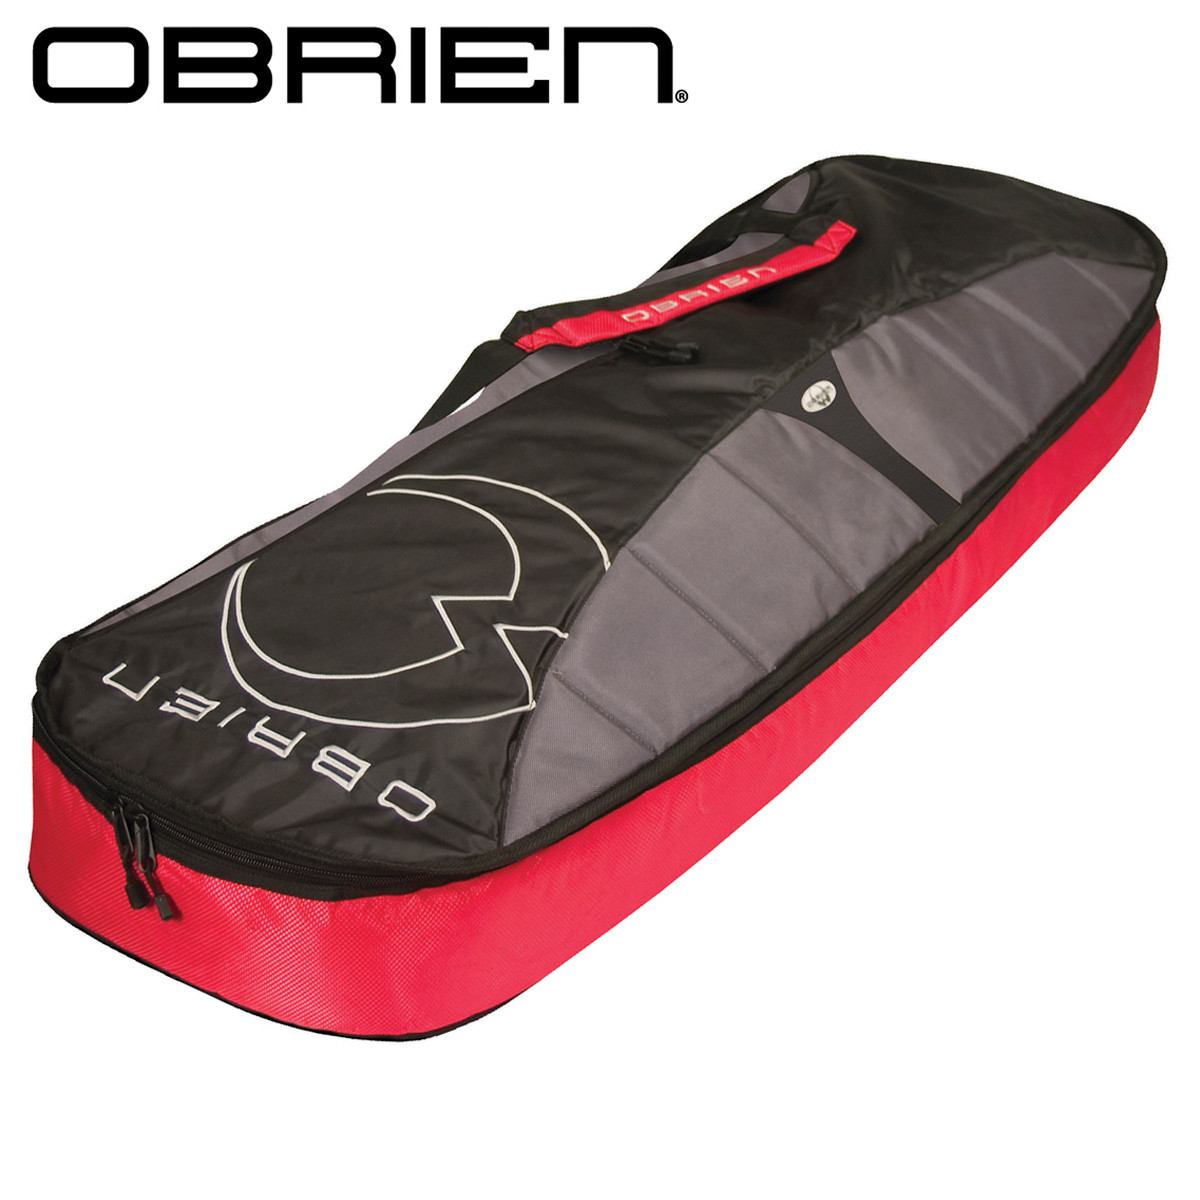 O'Brien Padded Wakeboard Bag for the Lowest Price at RIDE THE WAVE.